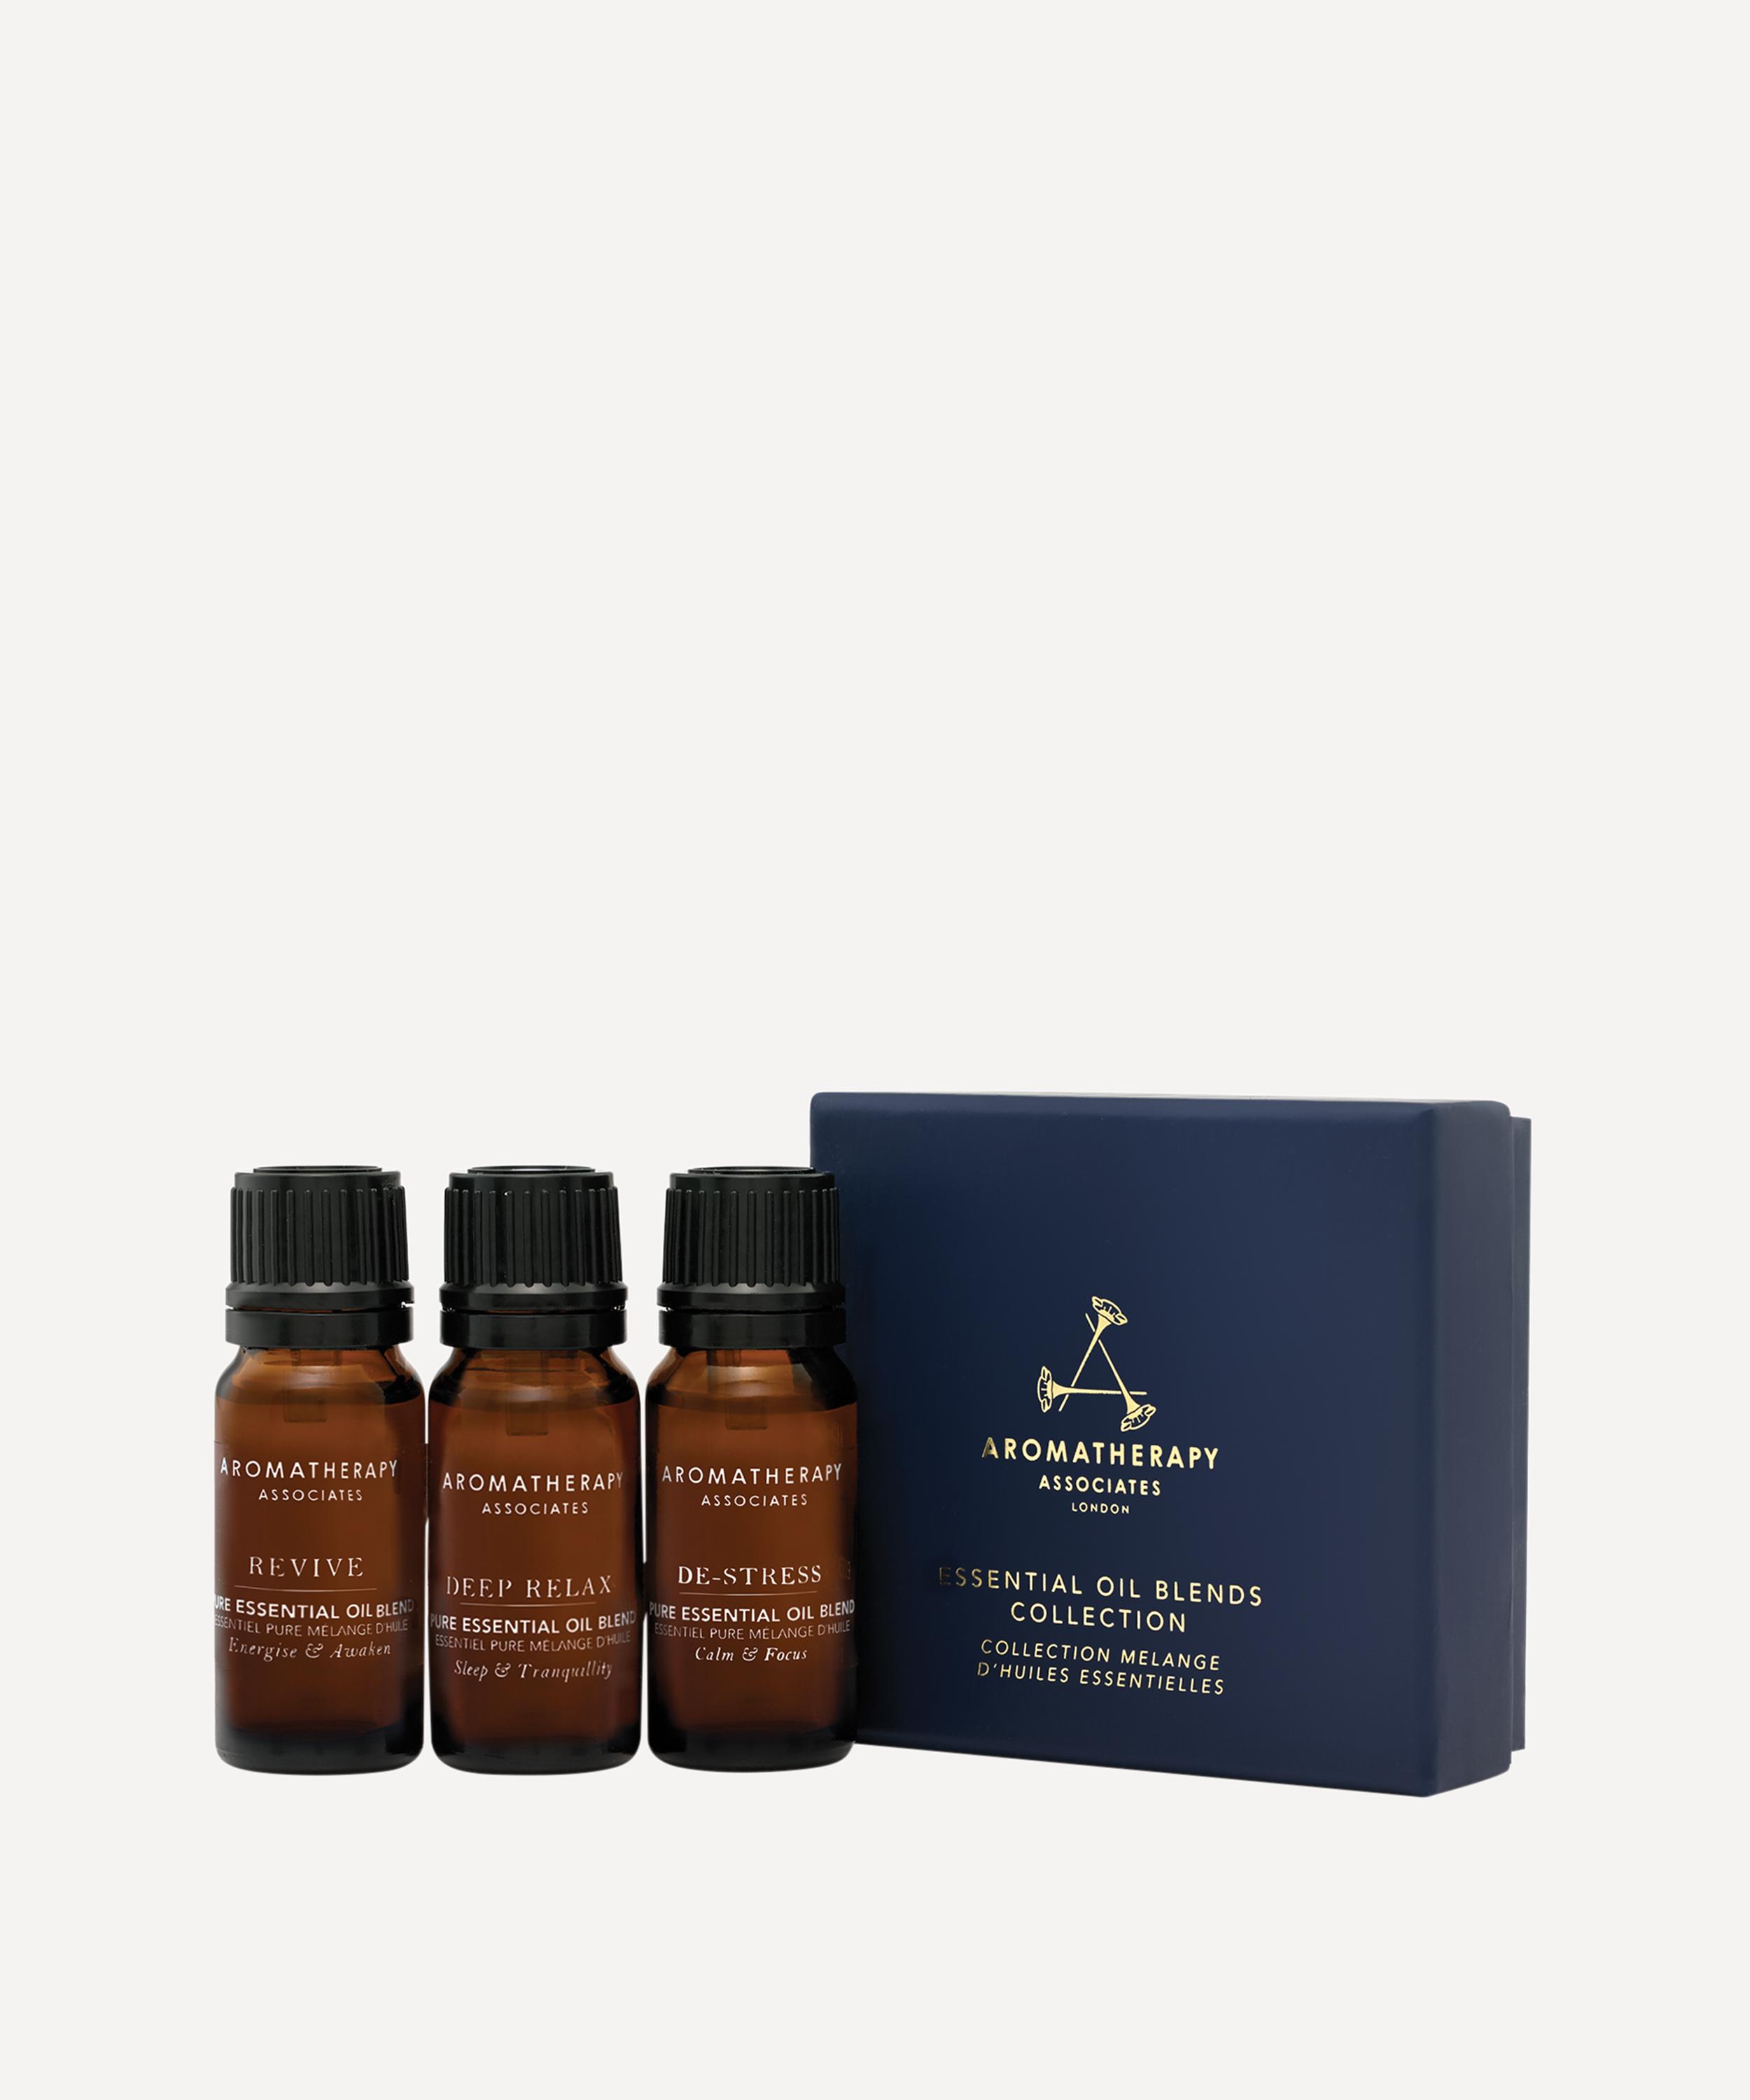 AROMATHERAPY ASSOCIATES ESSENTIAL OIL BLENDS COLLECTION